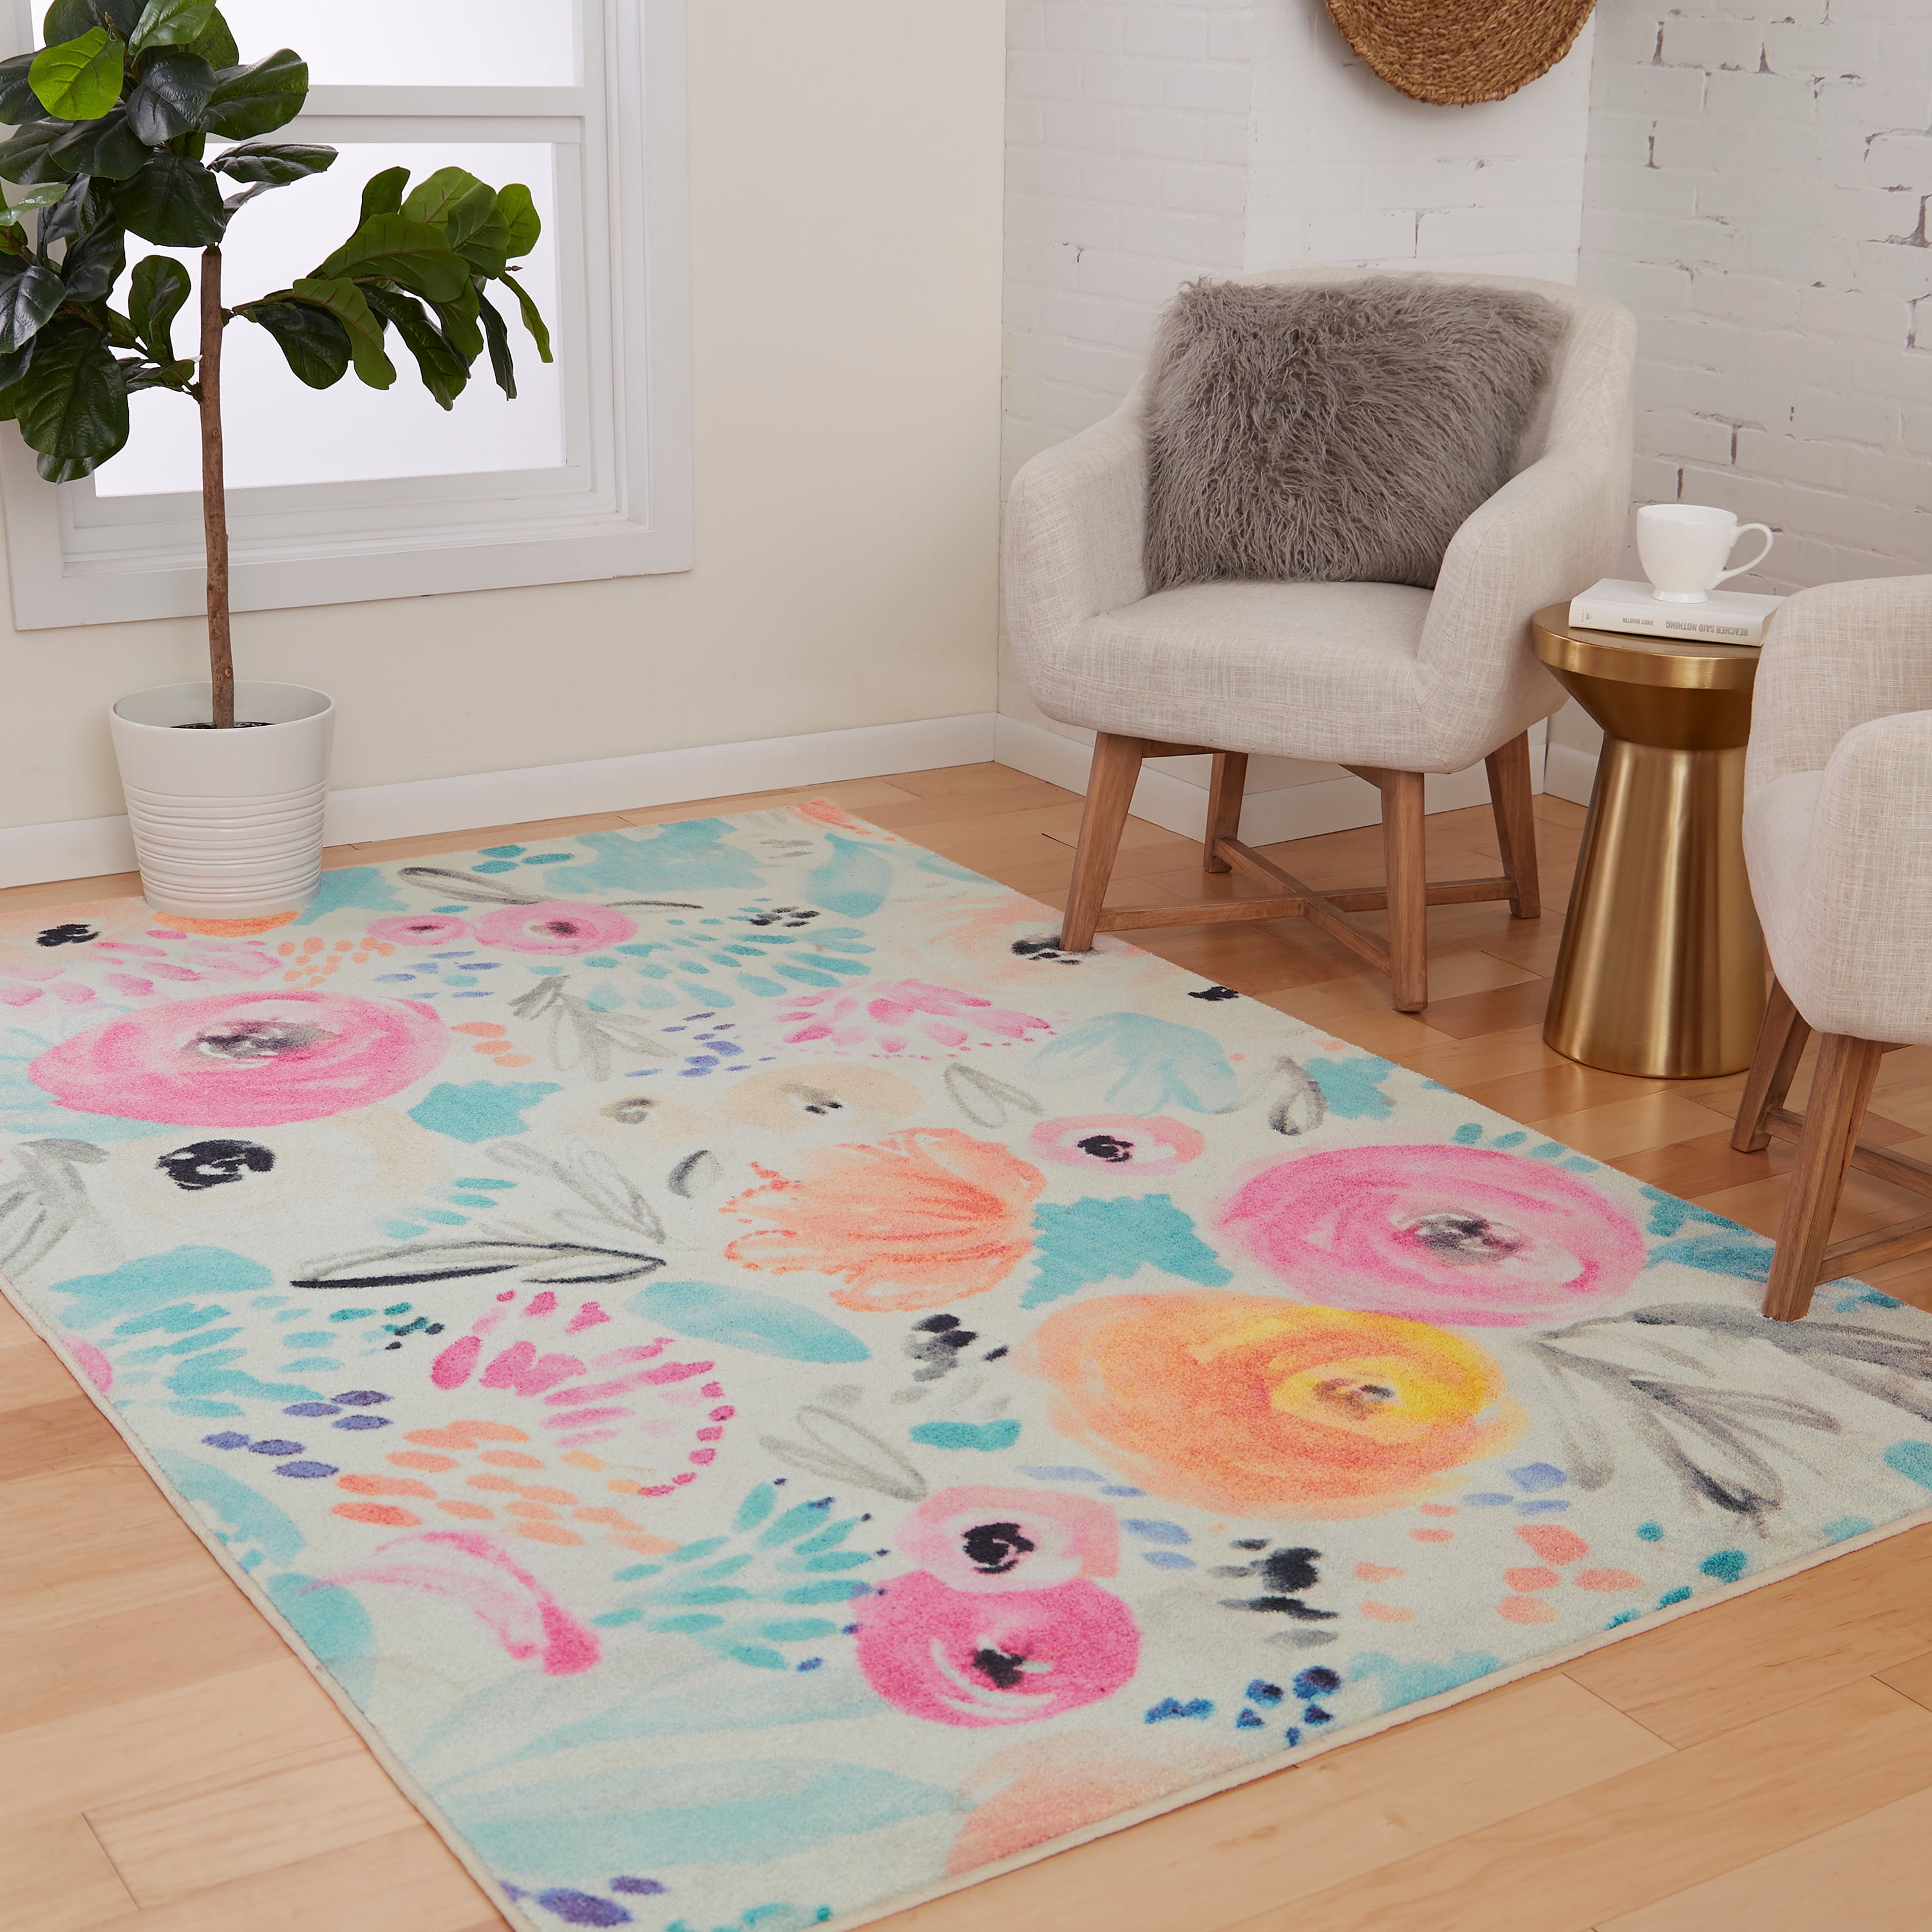 Living Room Bedroom Kitchen Decorative Unique Lightweight Printed Rugs ALAZA My Daily Colorful Floral Watercolor Spring Flowers Area Rug 4' x 5'3